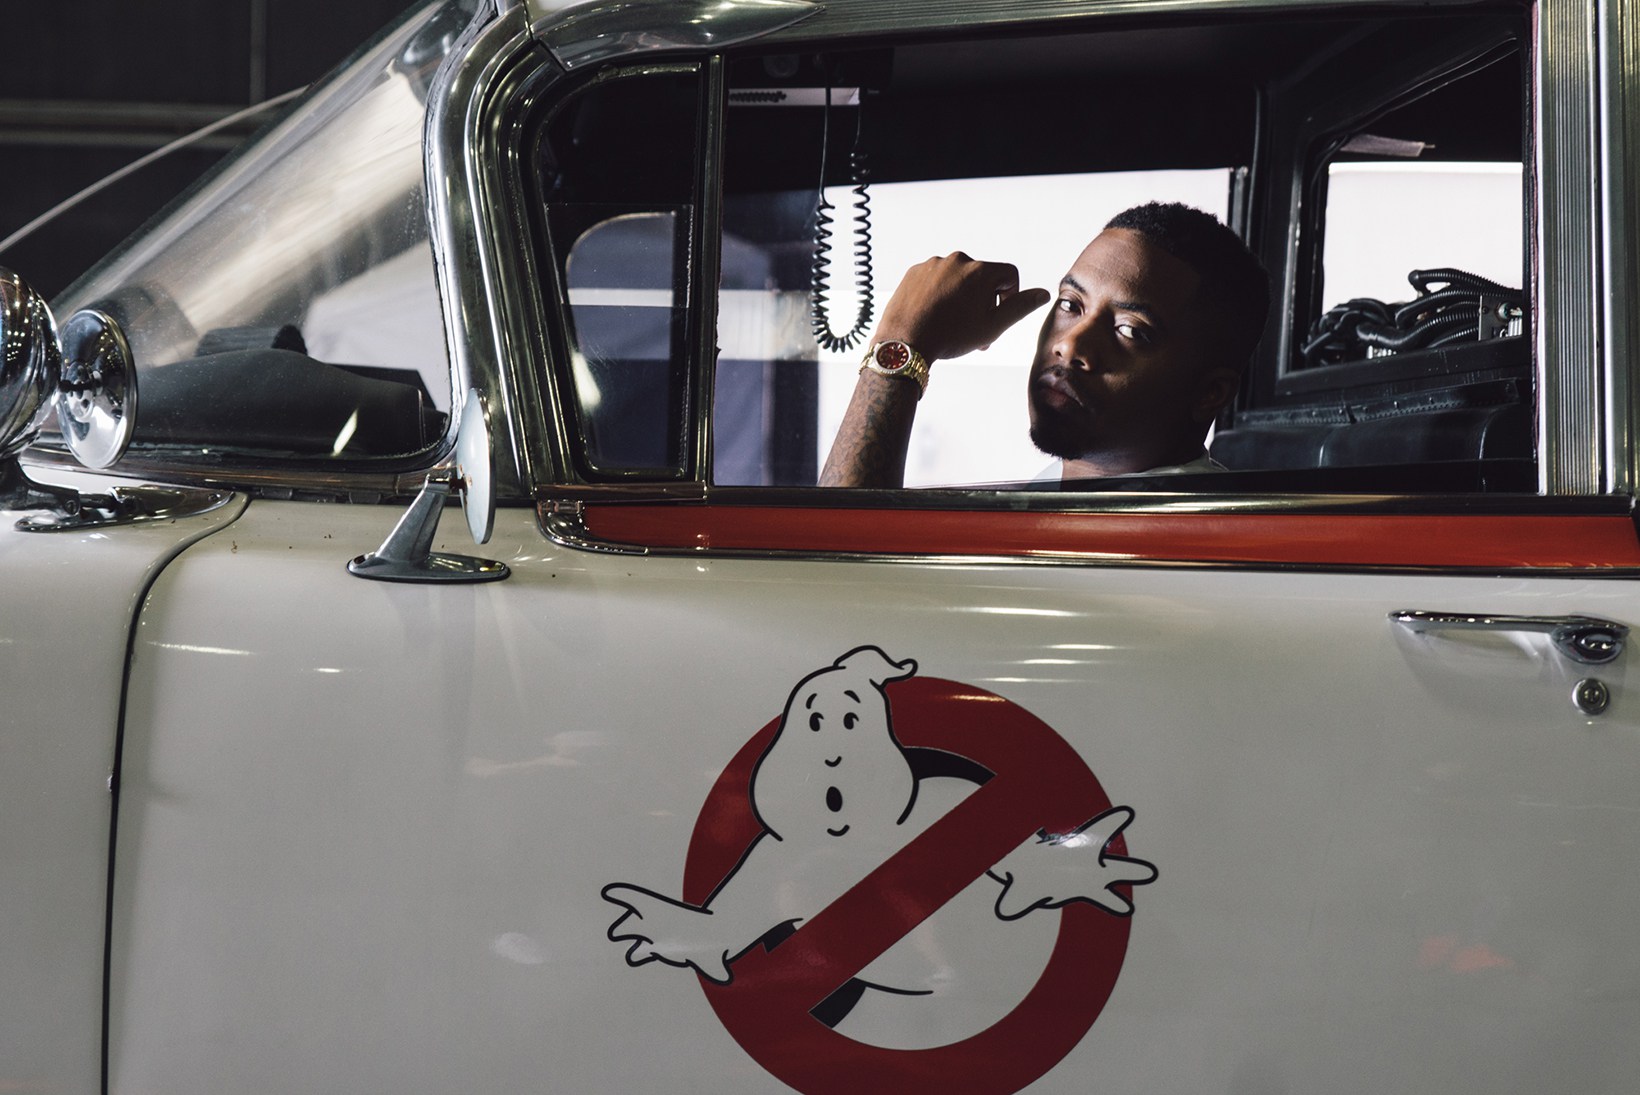 nas-hstry-clothing-ghostbusters-02